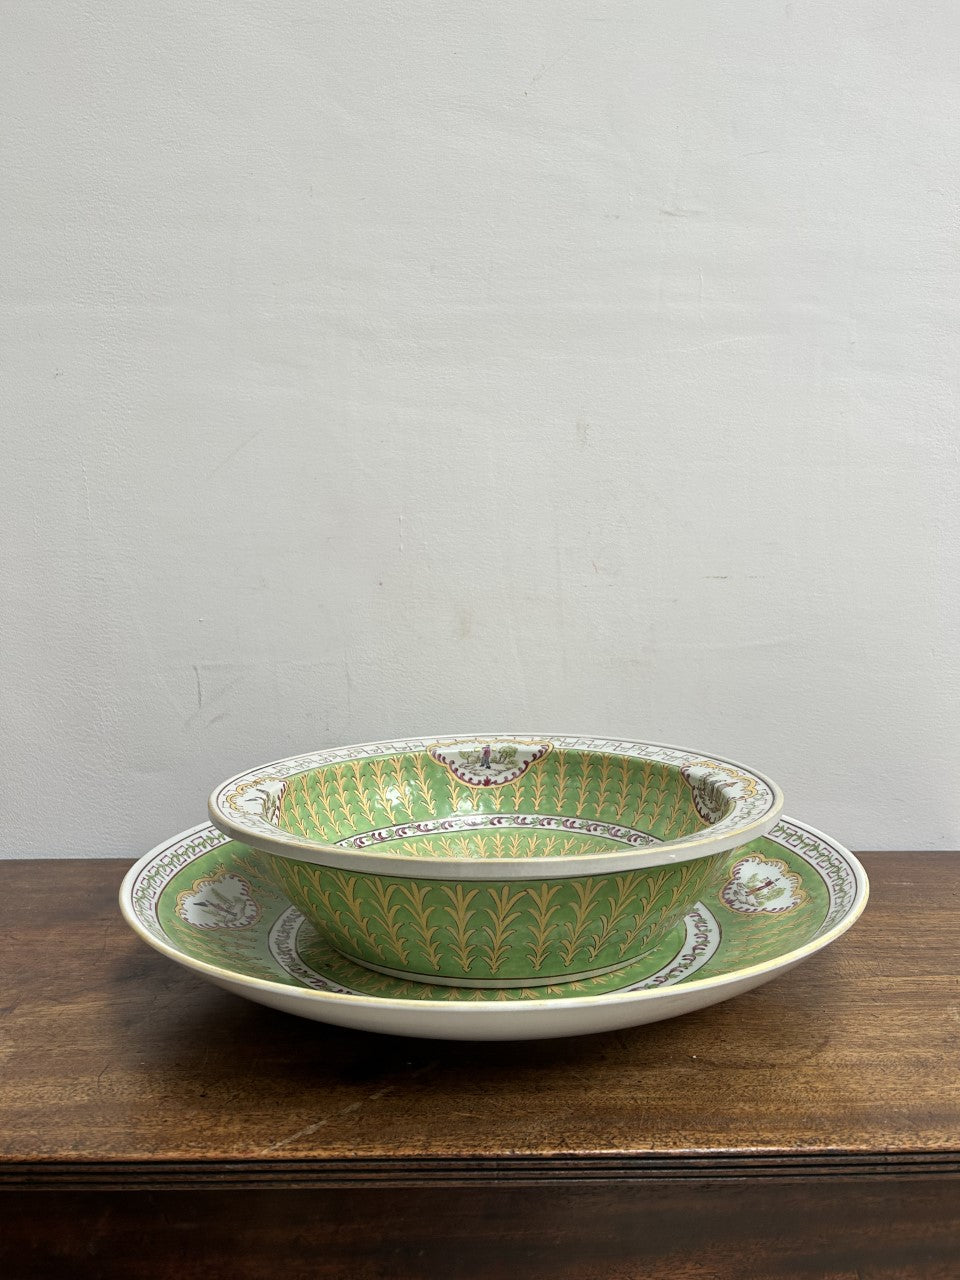 Mid 20th century Chinese Porcelain Bowl